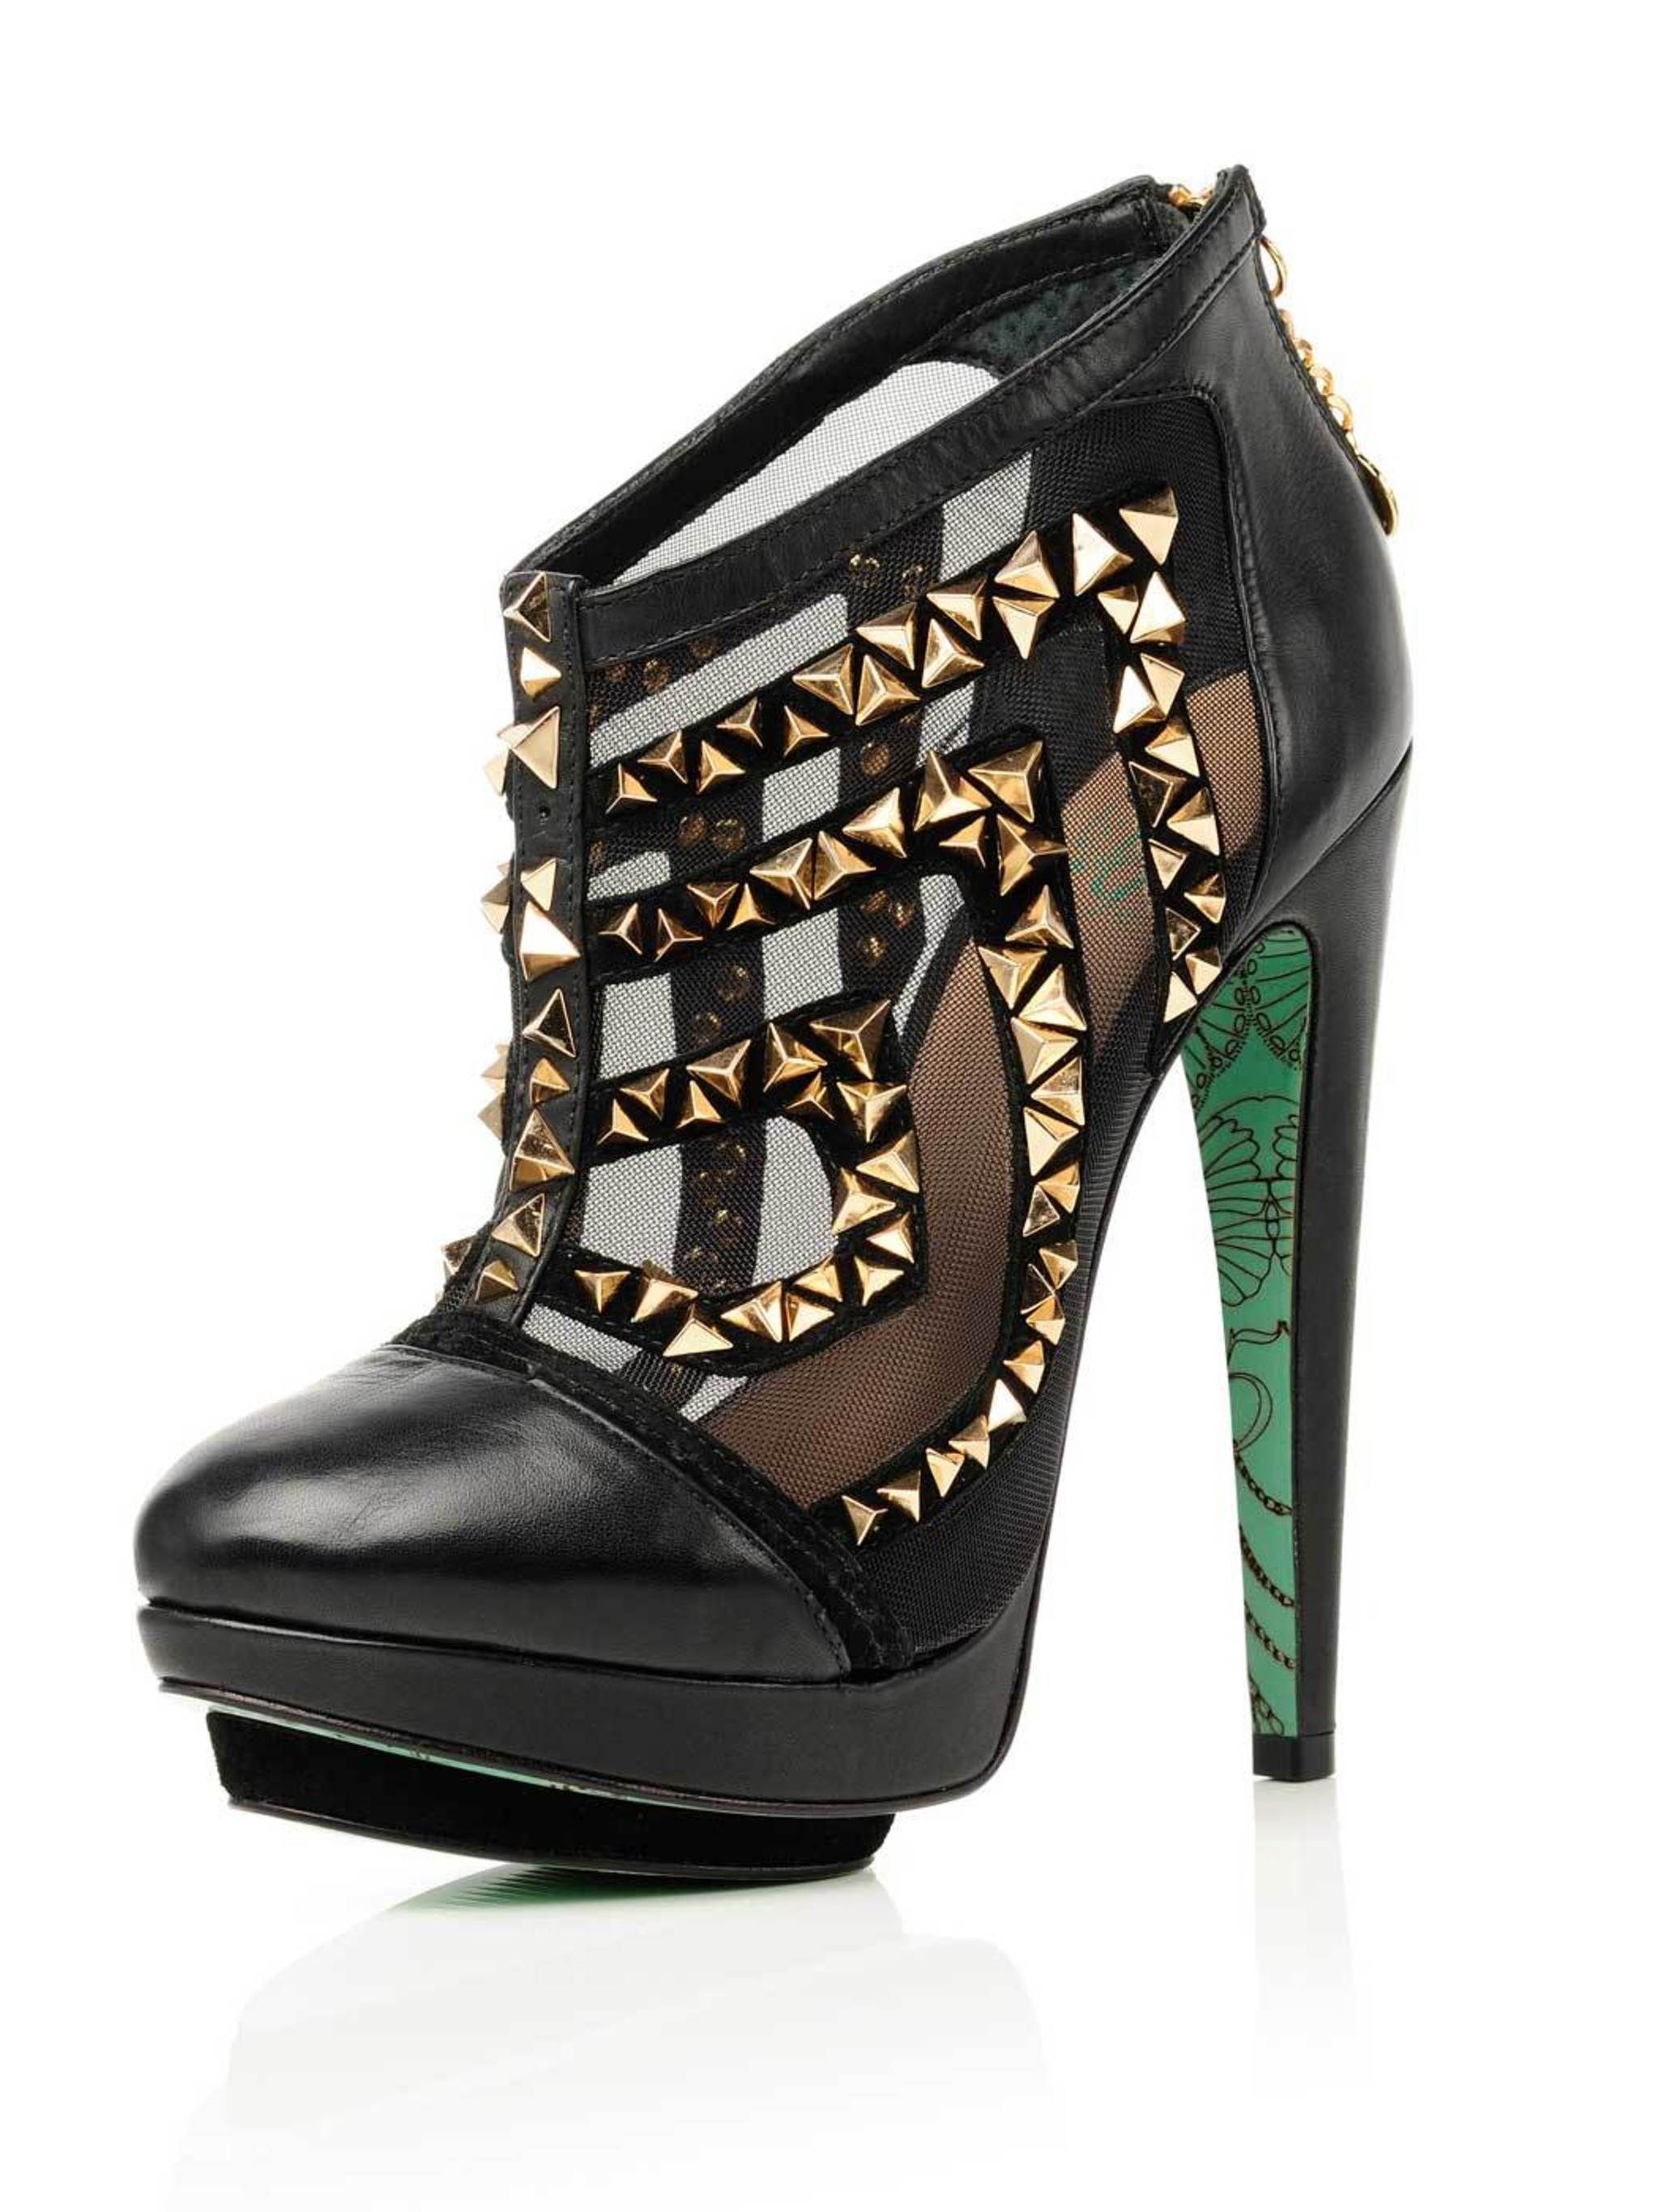 First look: Chloe Green shoes Autumn Winter 2012 for TOPSHOP - Chloe's  second accessories collection | ELLE UK